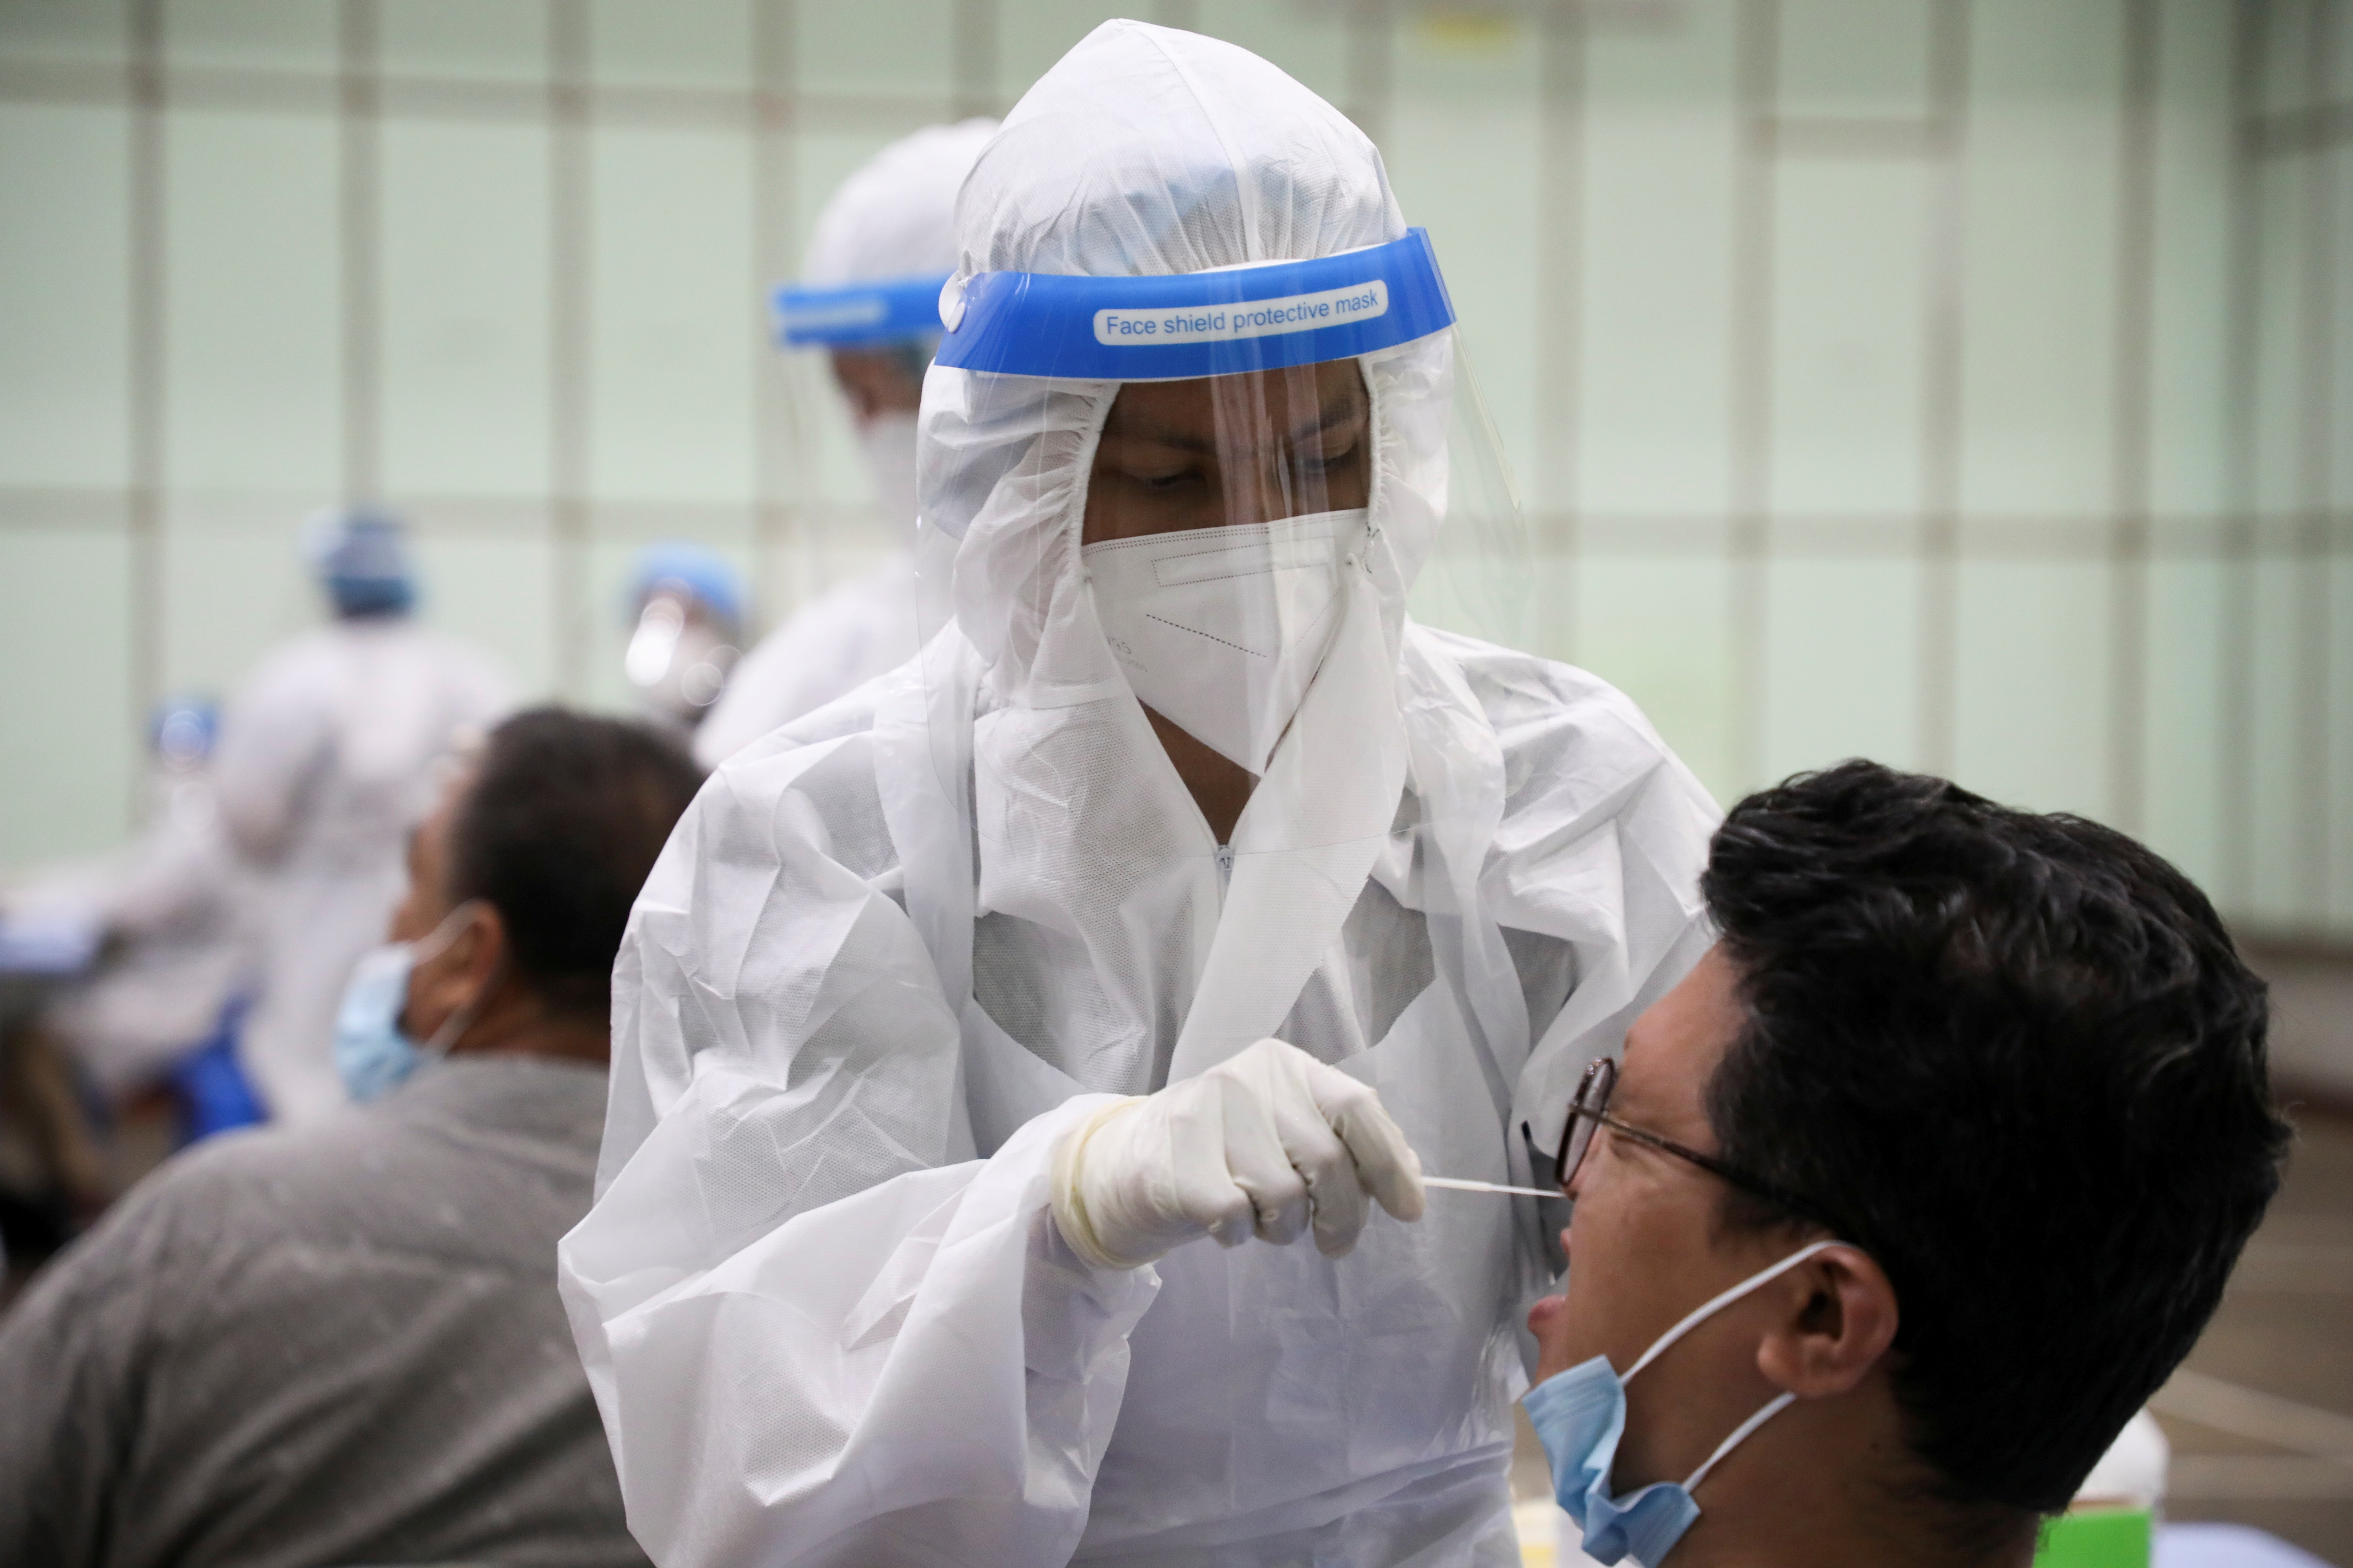 A medical worker collects a swab sample from a man to be tested for COVID-19, in Kuala Lumpur